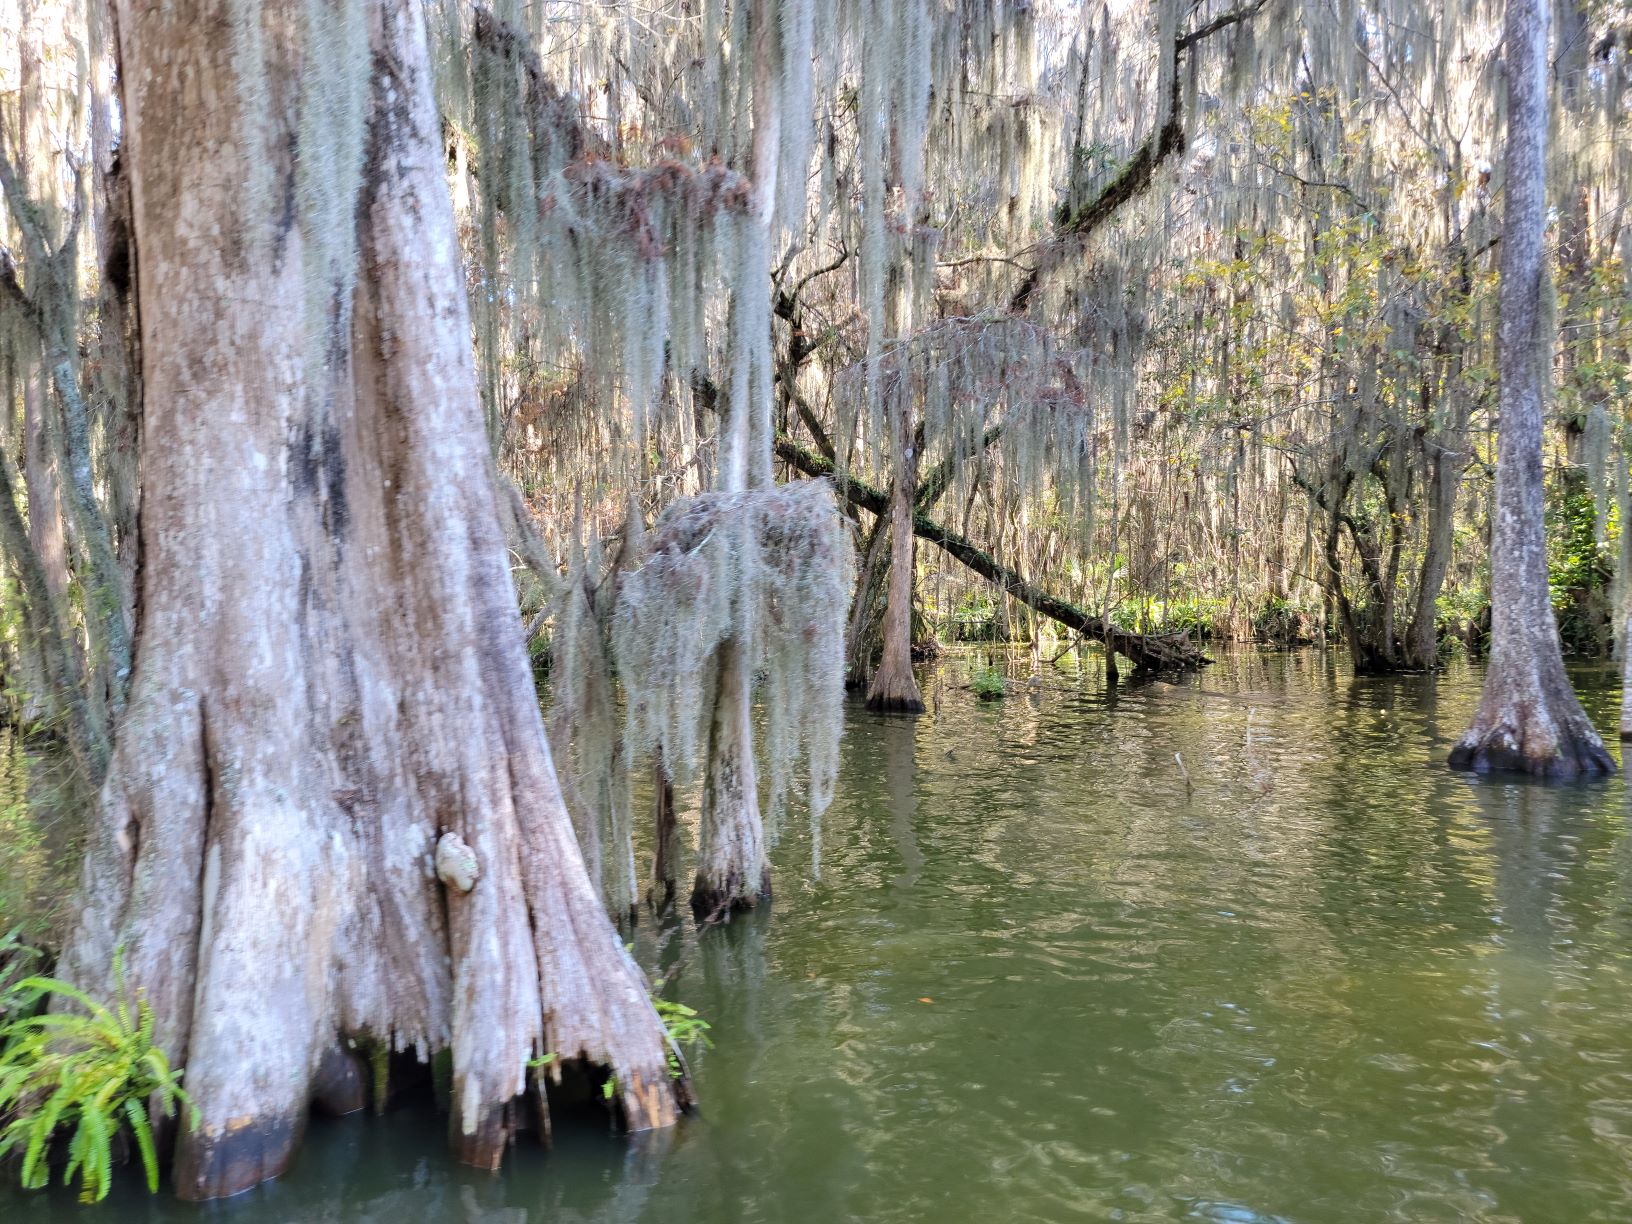 Cypress live hundreds of years in the Elfin River and Dora Canal in Lake County, Florida 